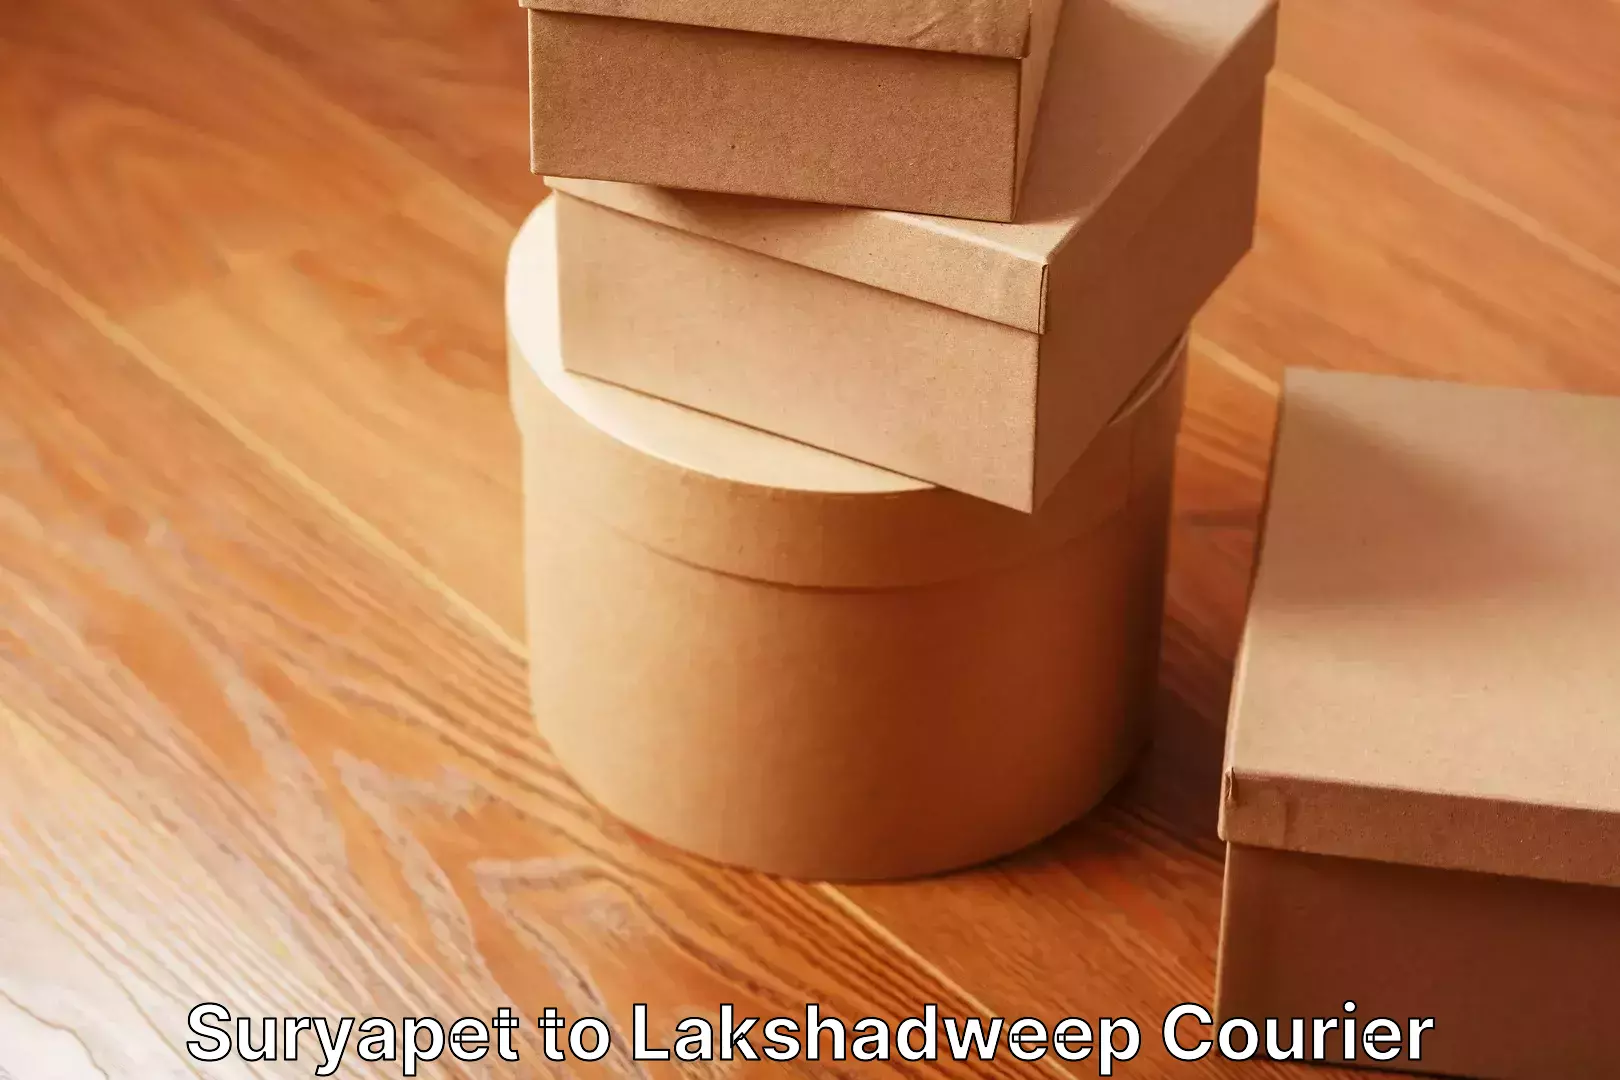 Furniture delivery service in Suryapet to Lakshadweep